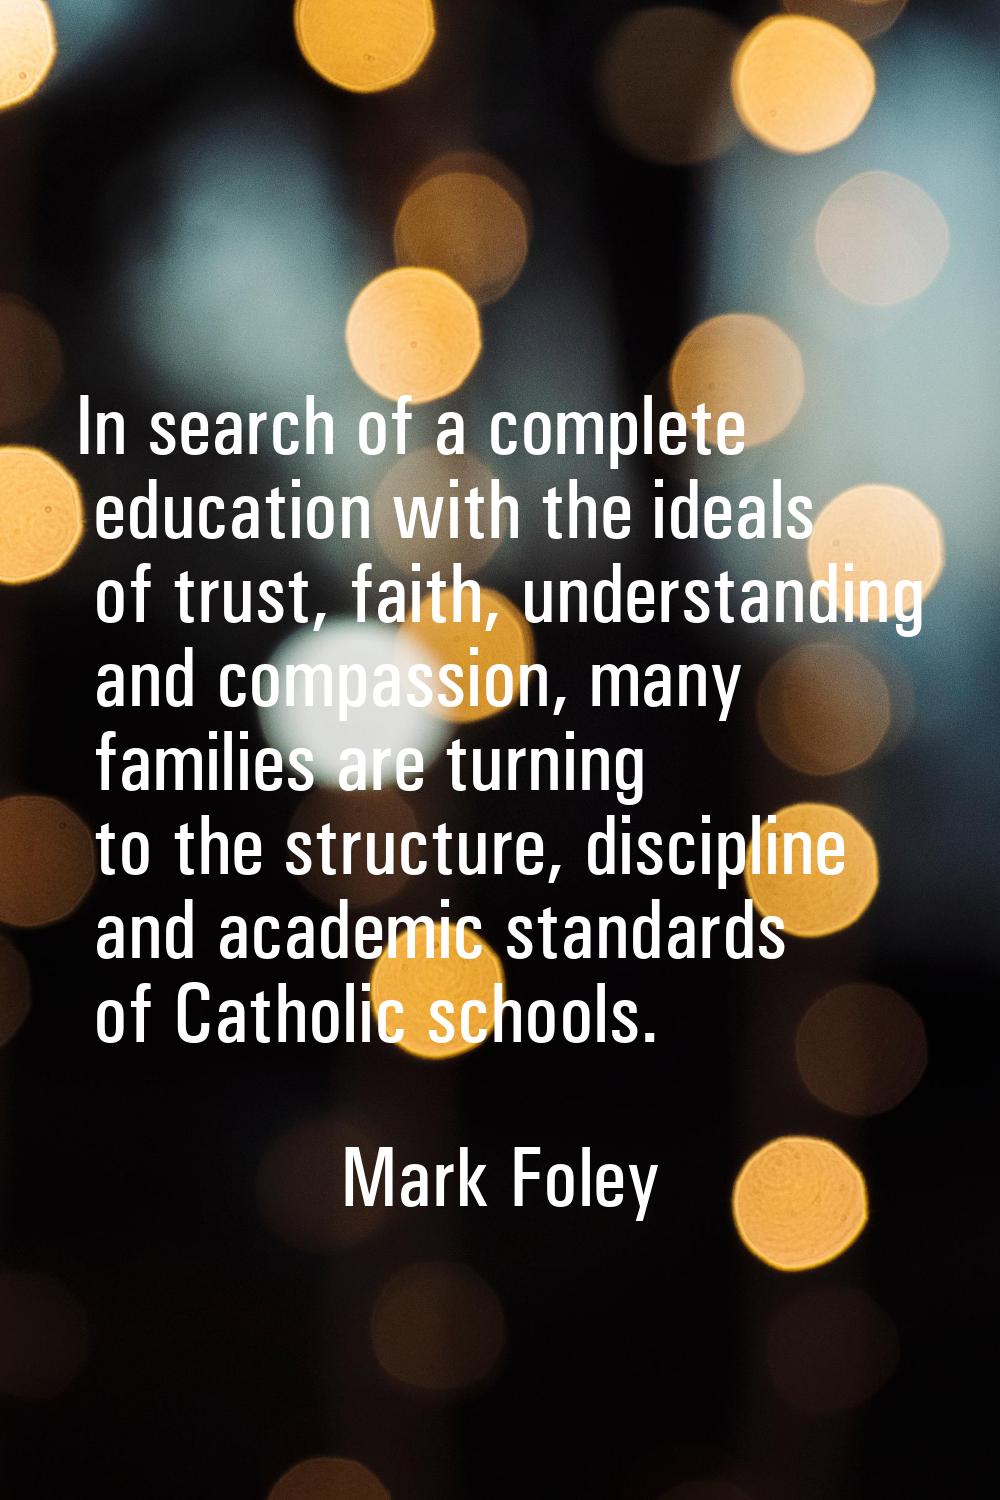 In search of a complete education with the ideals of trust, faith, understanding and compassion, ma